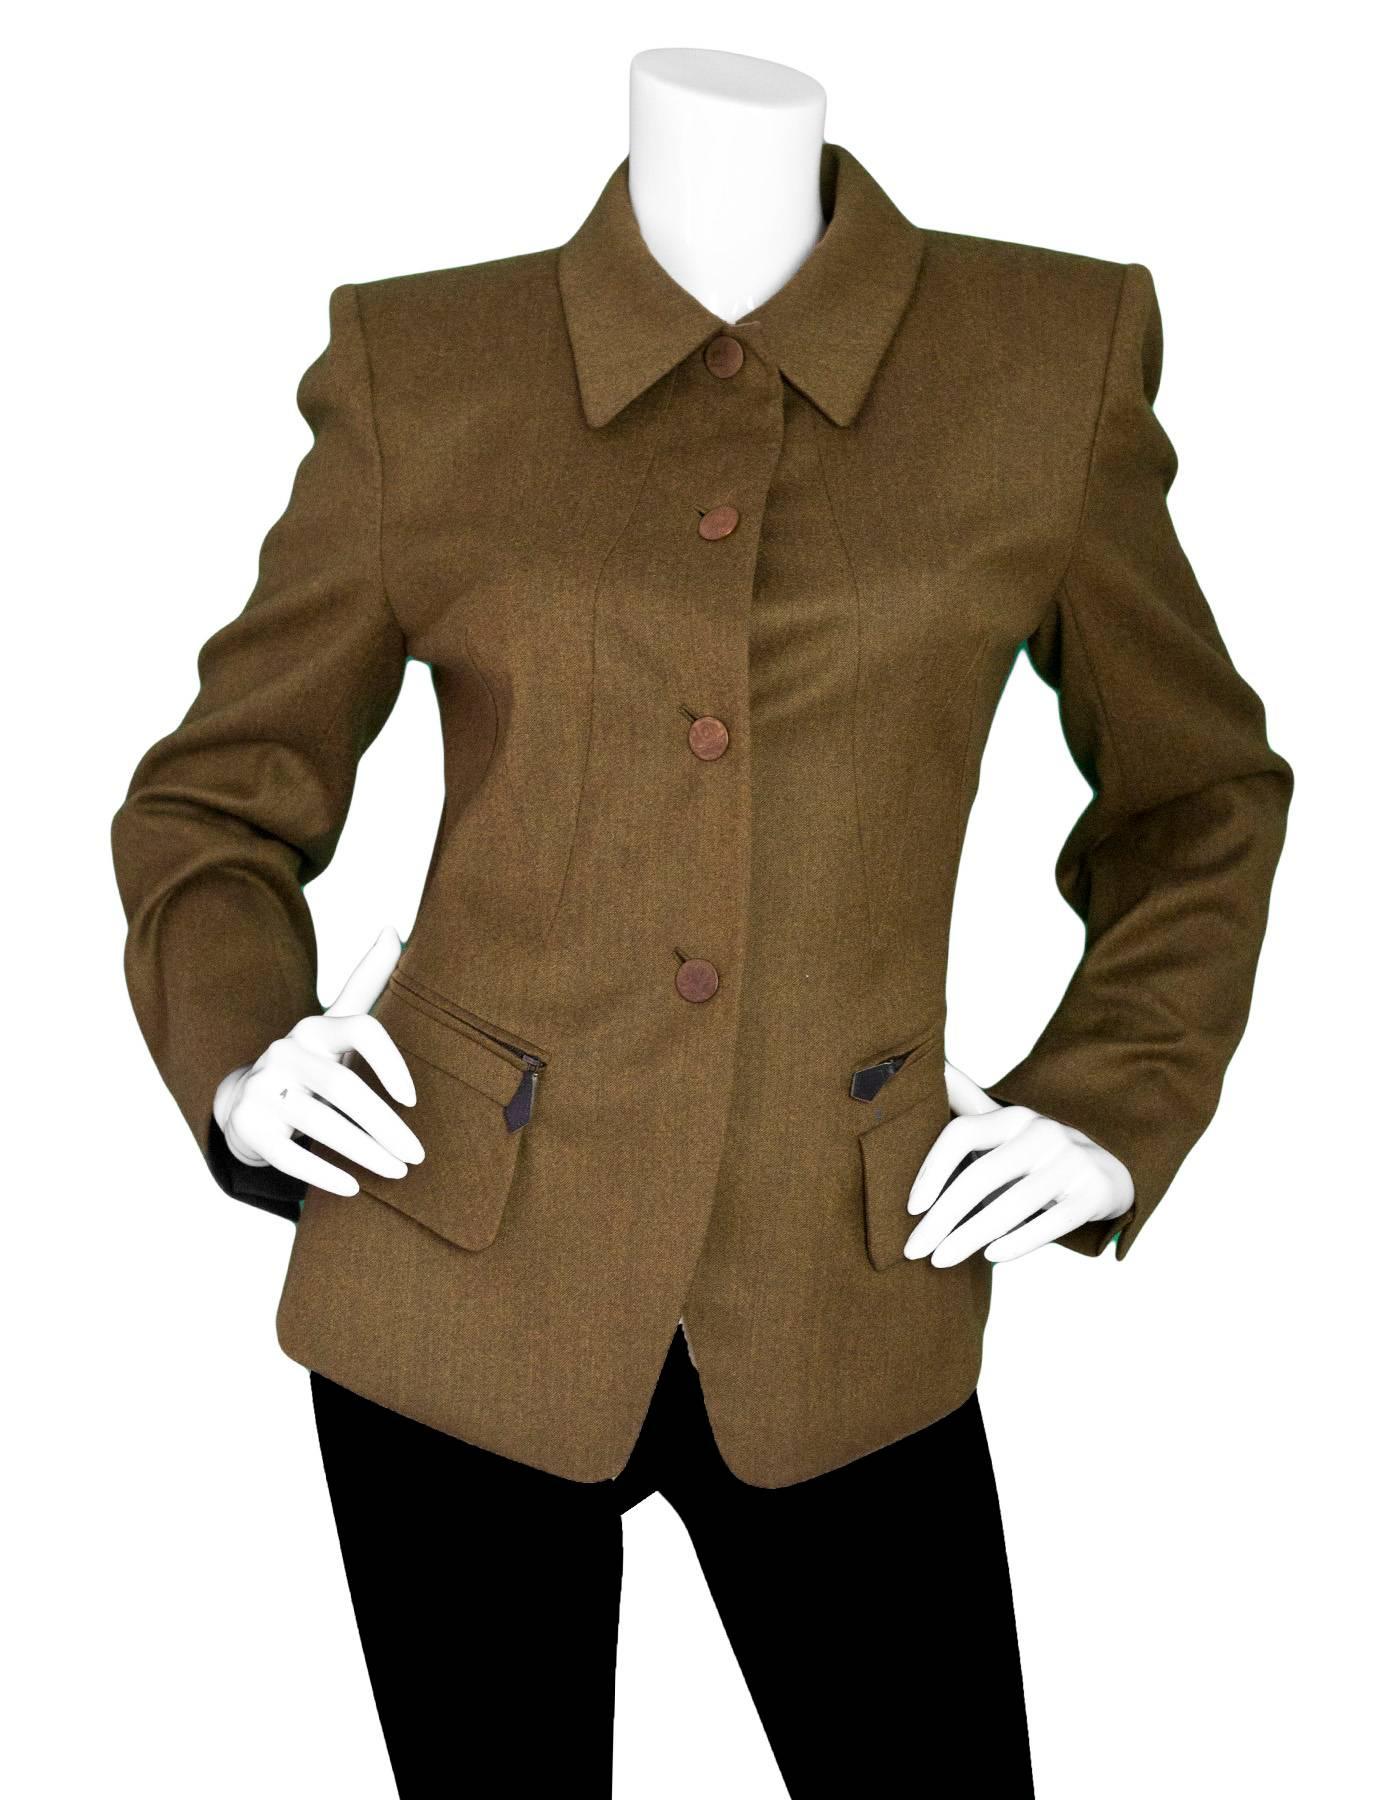 Hermes Vintage Olive Green Wool Riding Jacket

Made In: France
Color: Olive green
Composition: 90% wool, 10% cashmere
Lining: Burgundy stripe, 100% acetate
Closure/Opening: Button down front
Exterior Pockets: Two zipper pockets and two flap